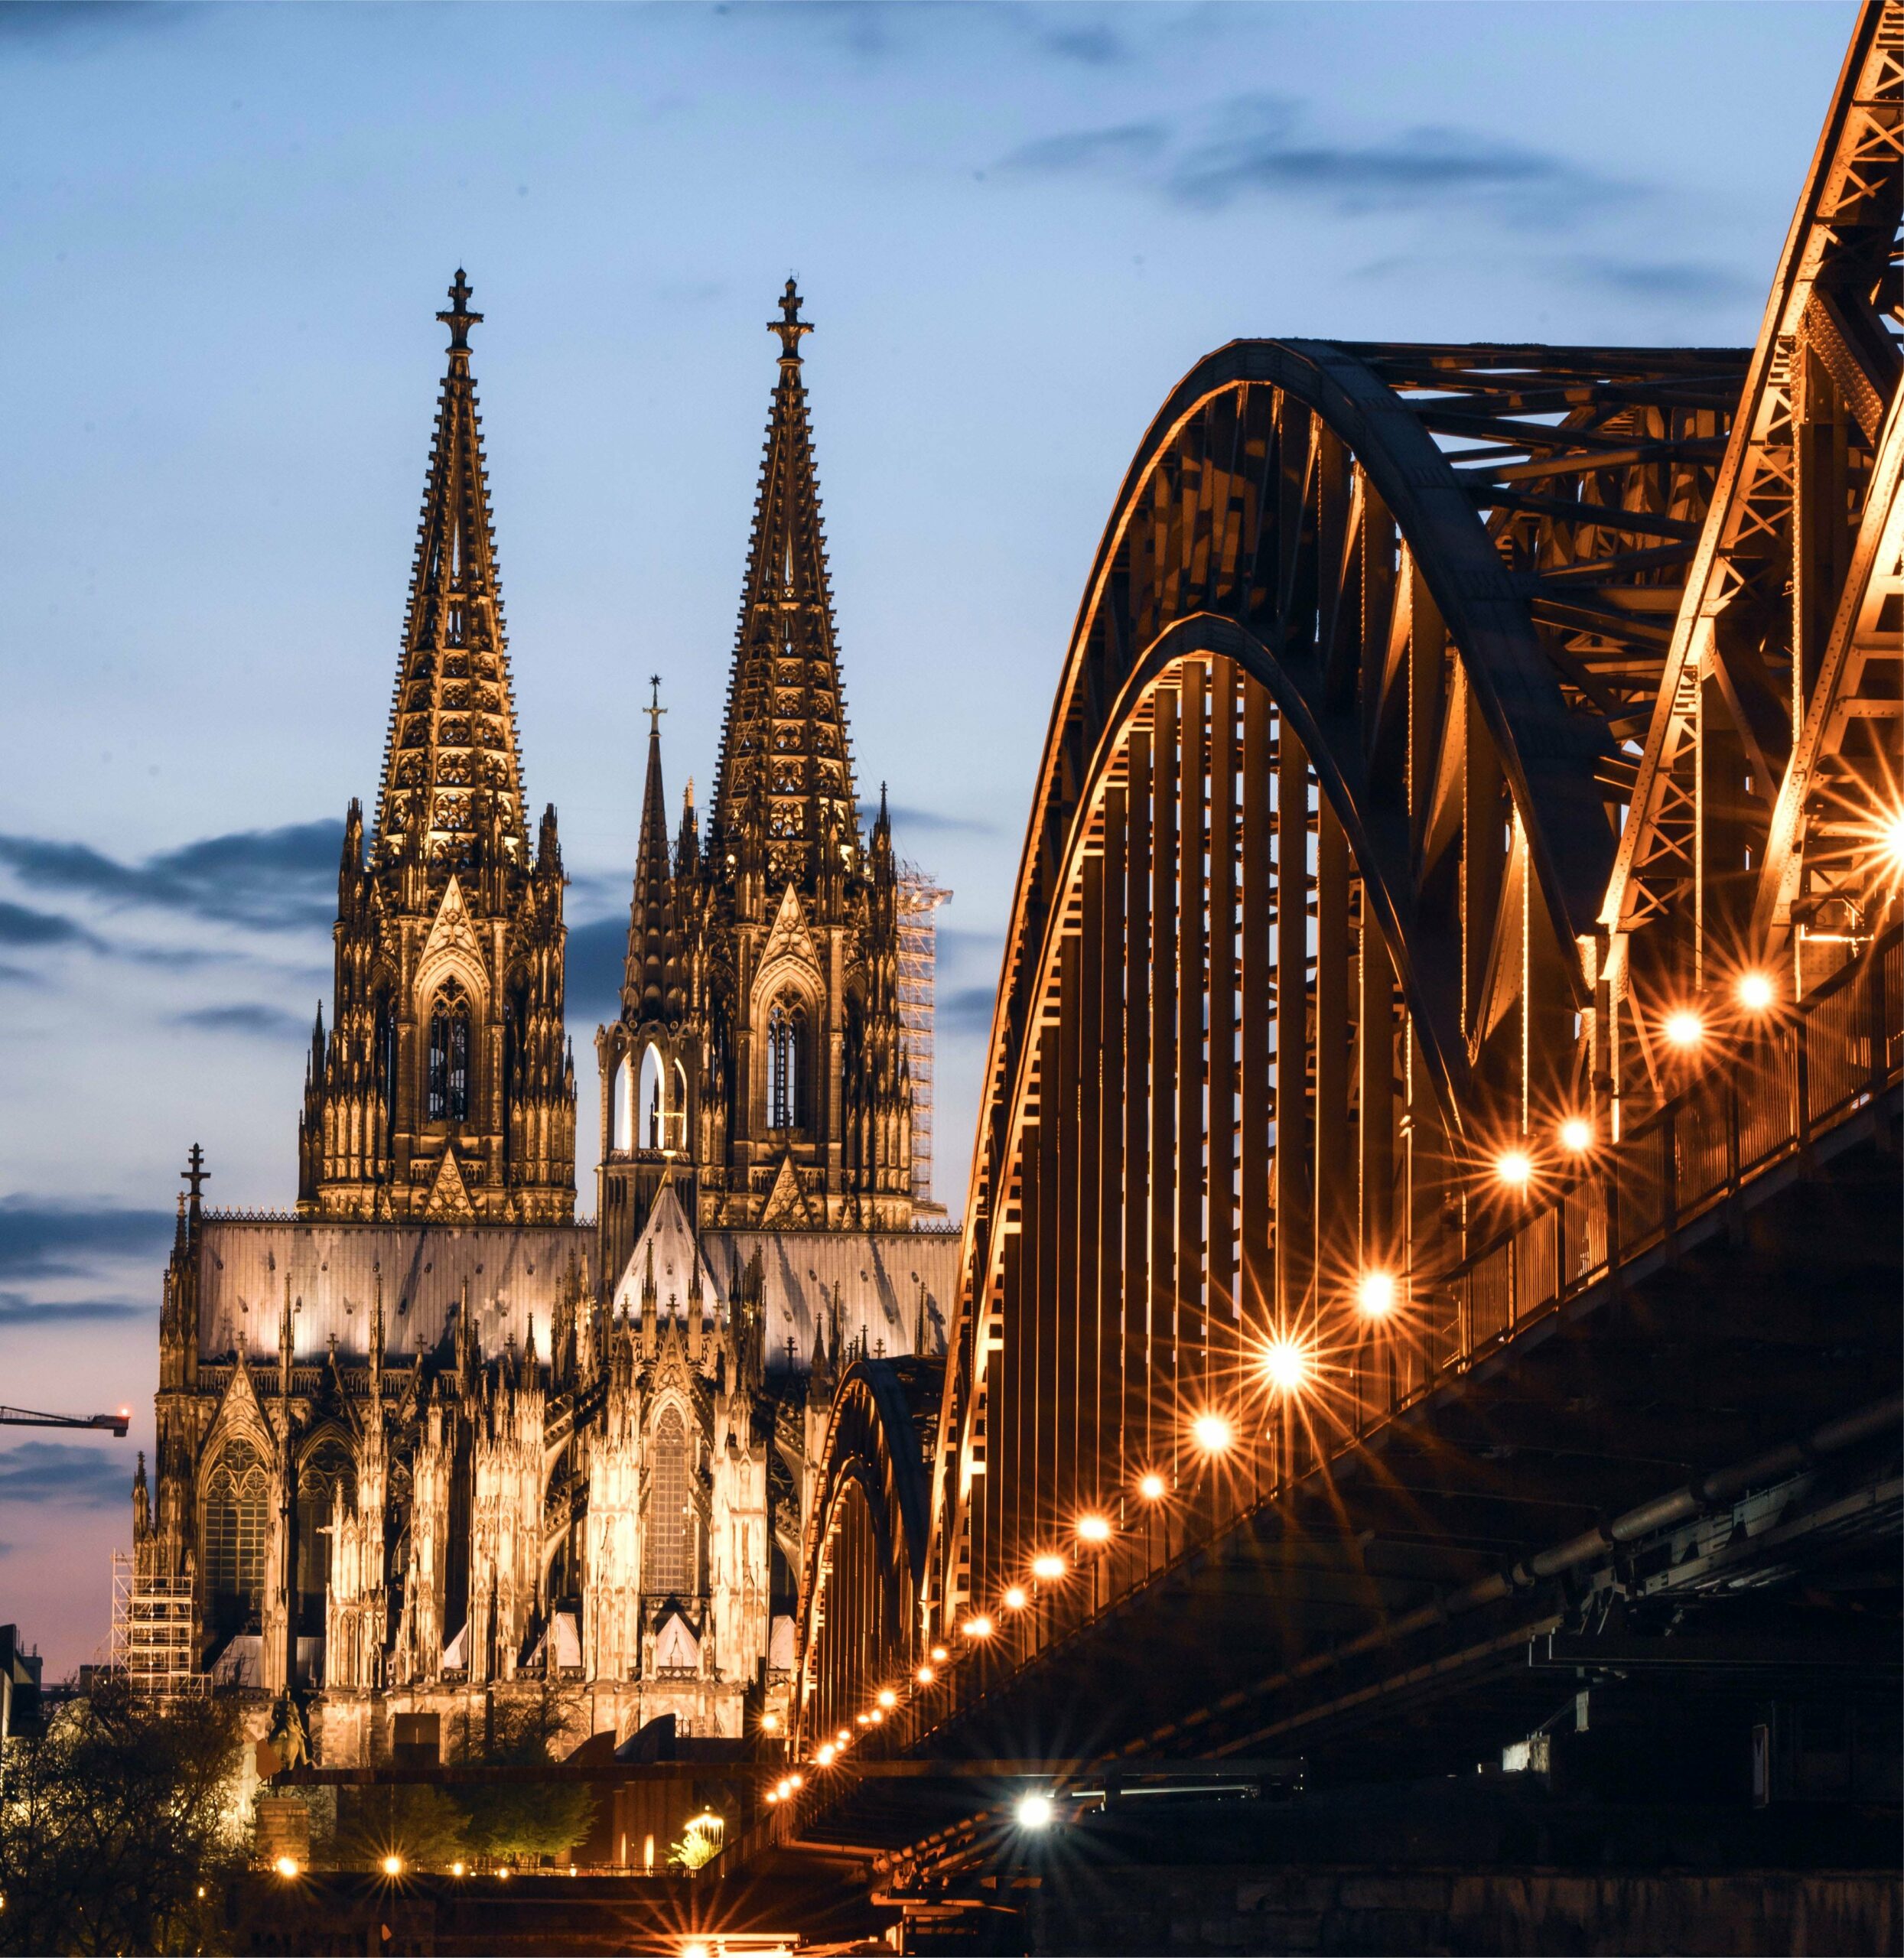 Cologne | photo by Timo A from Pexels